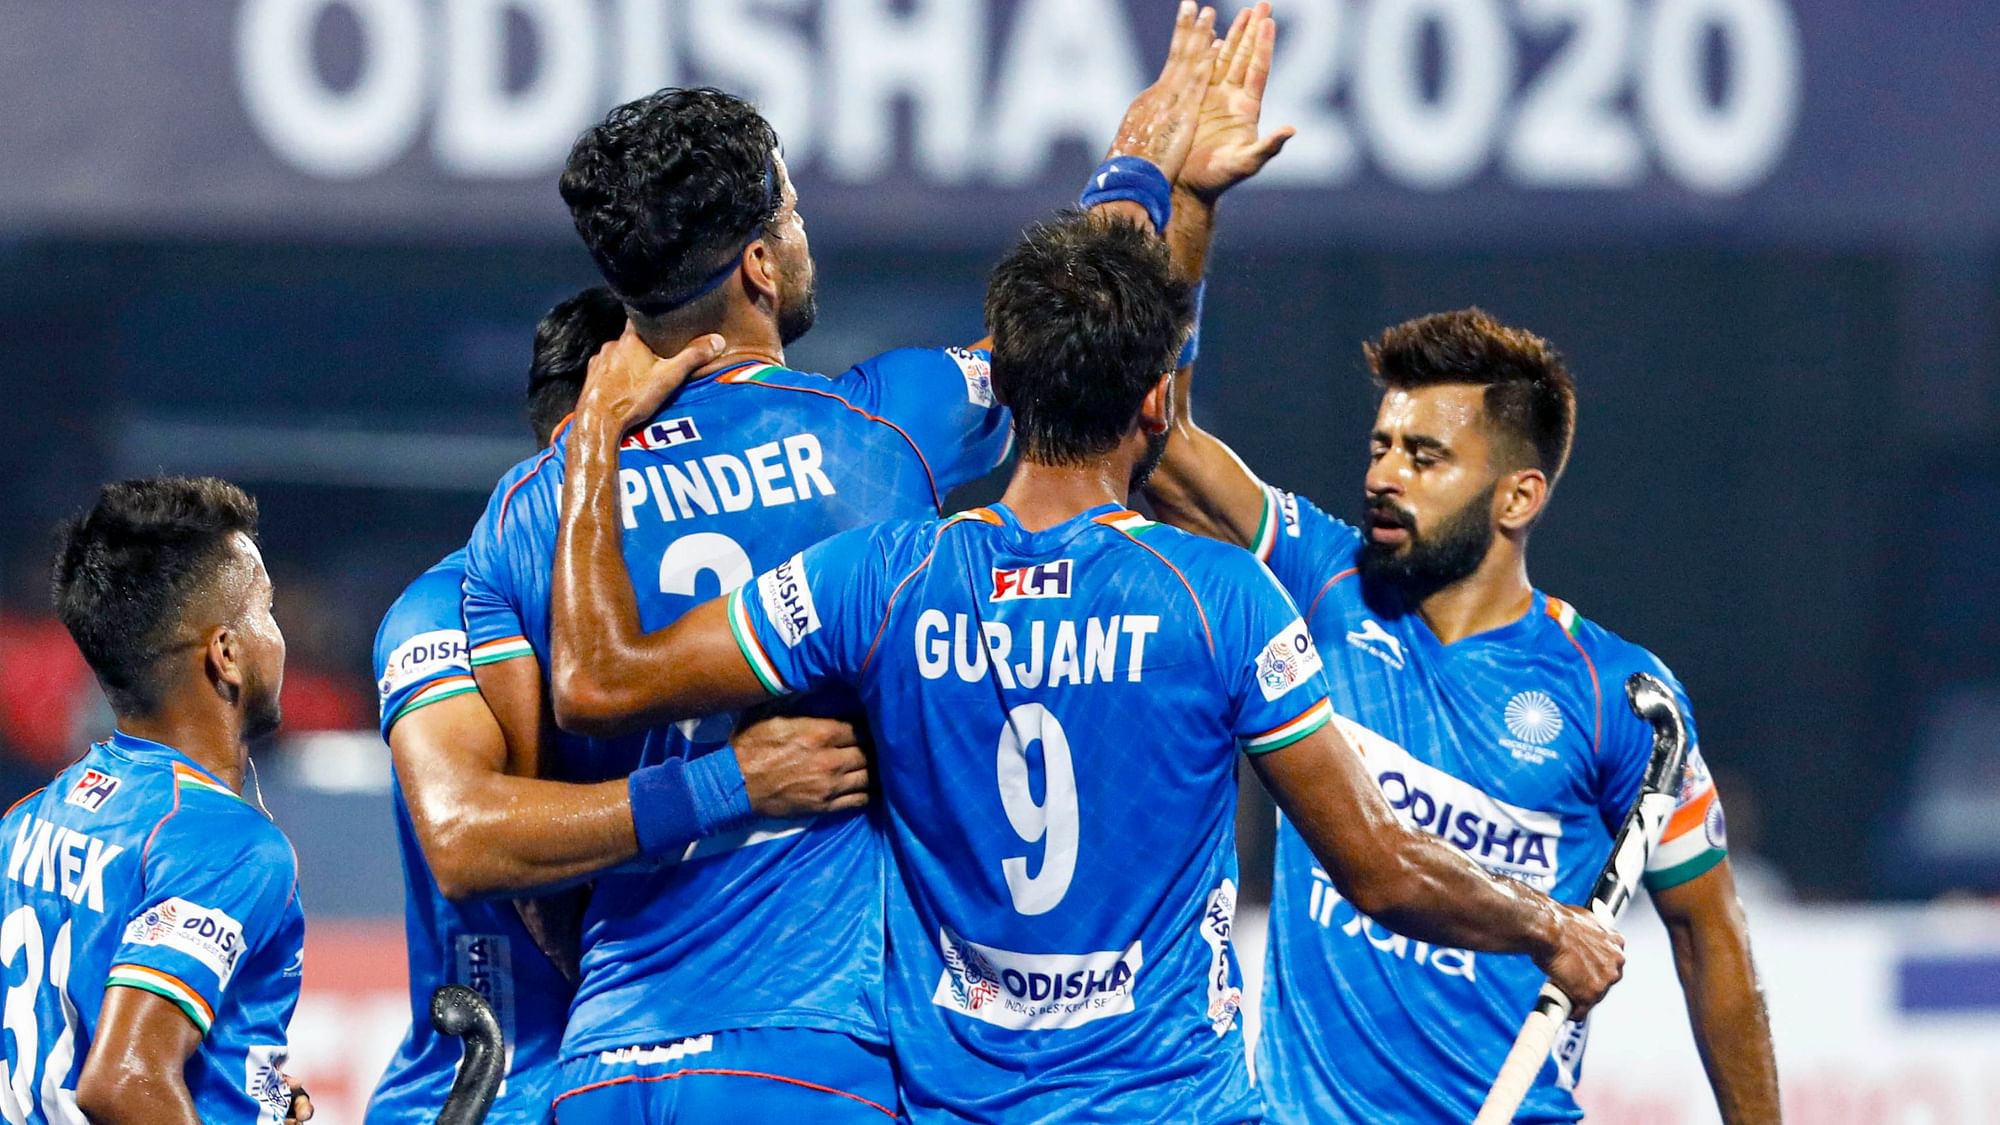 India beat world number three Netherlands 5-2 in the opening match of the FIH Pro League